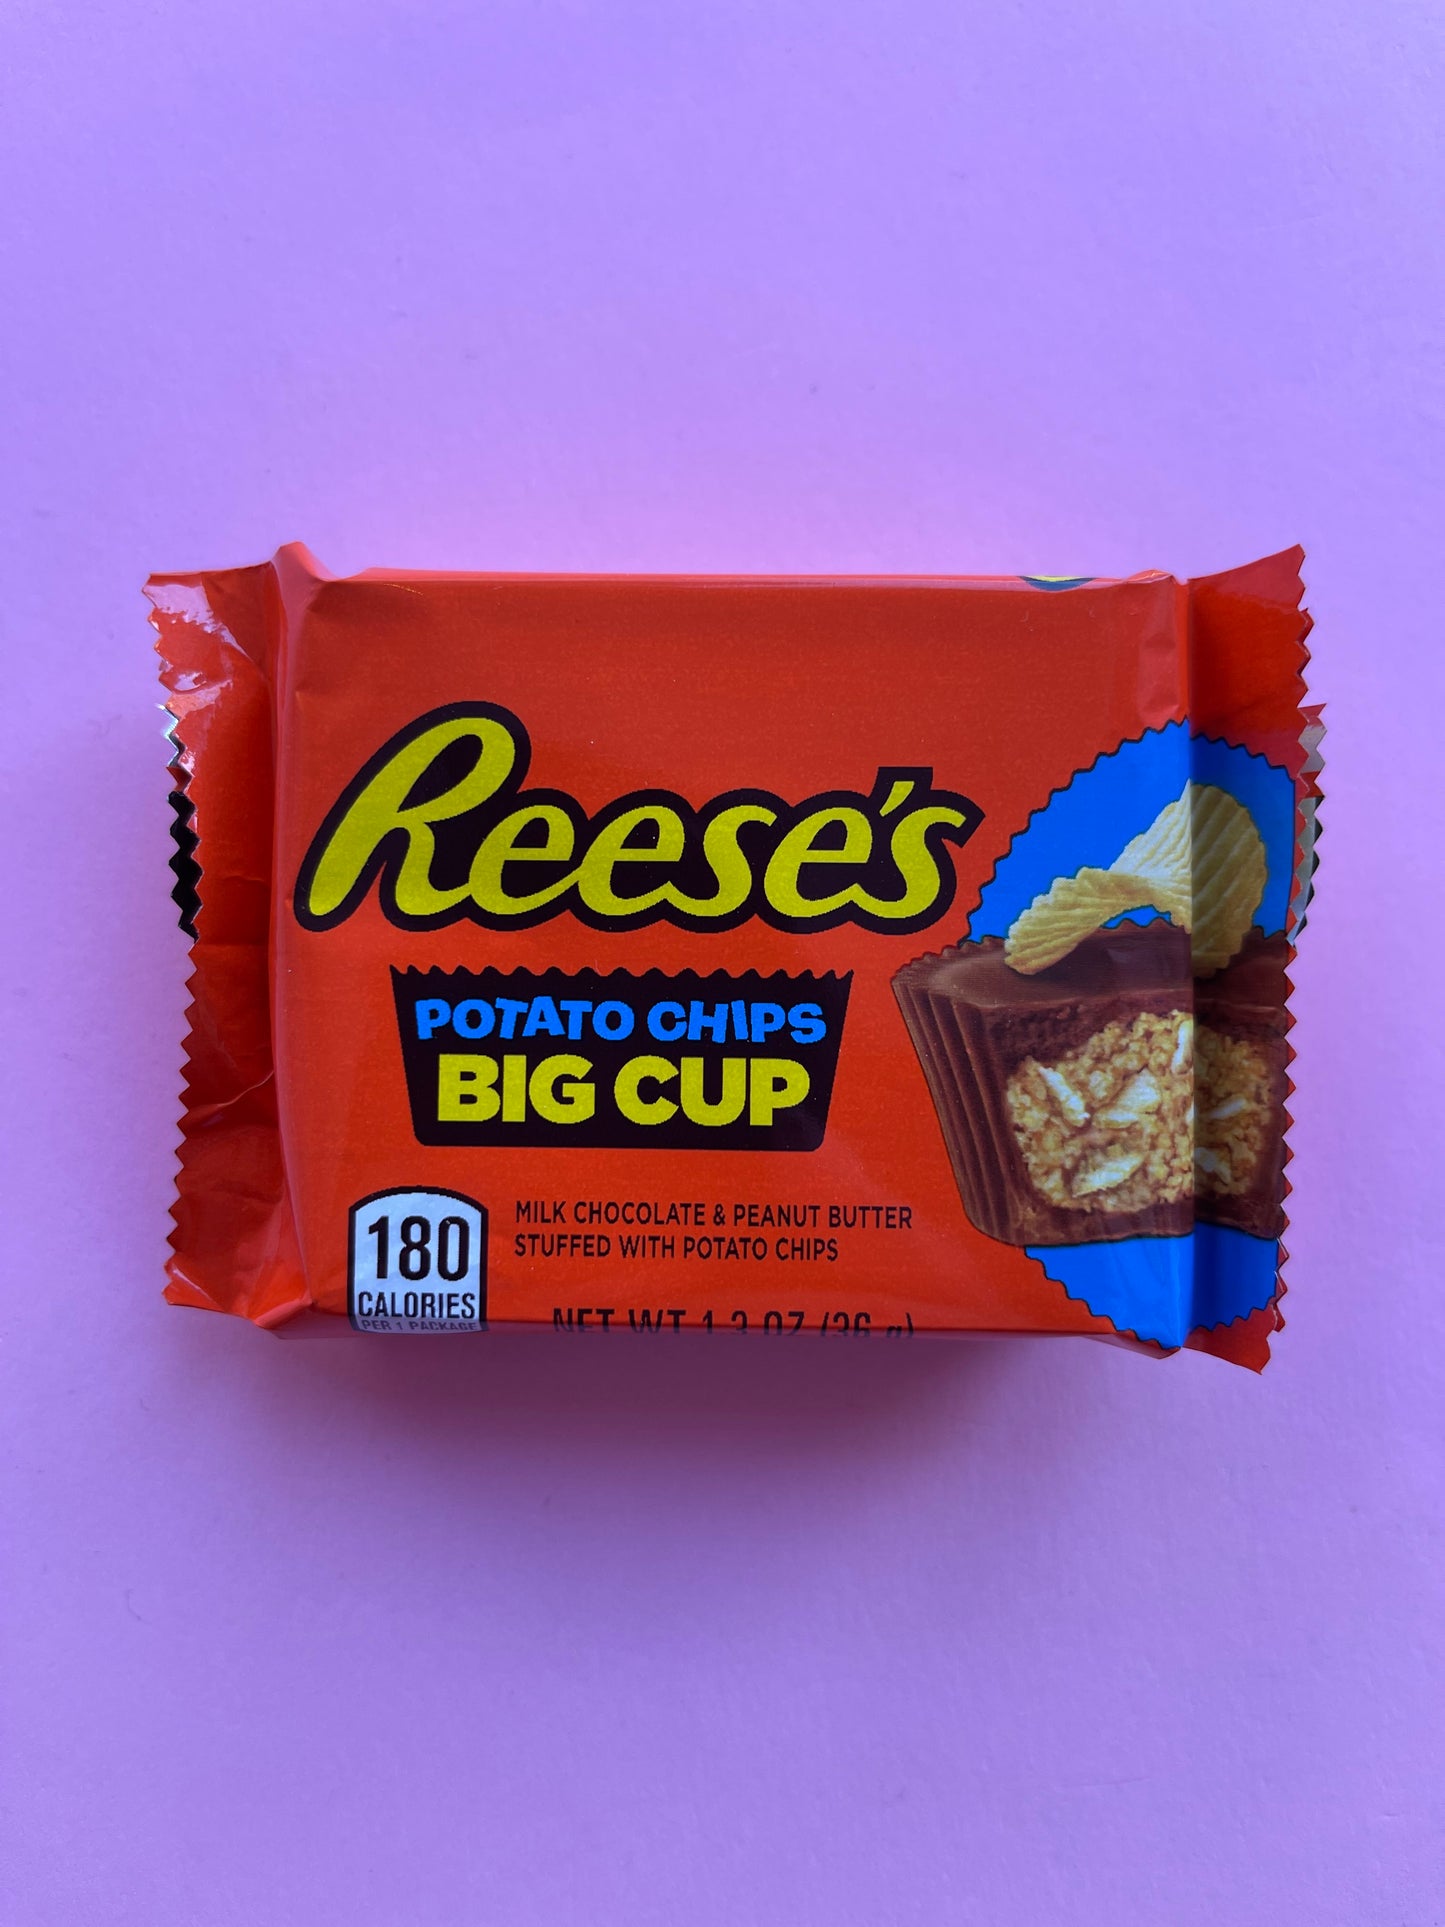 Reese’s Big Cup - Potato Chips